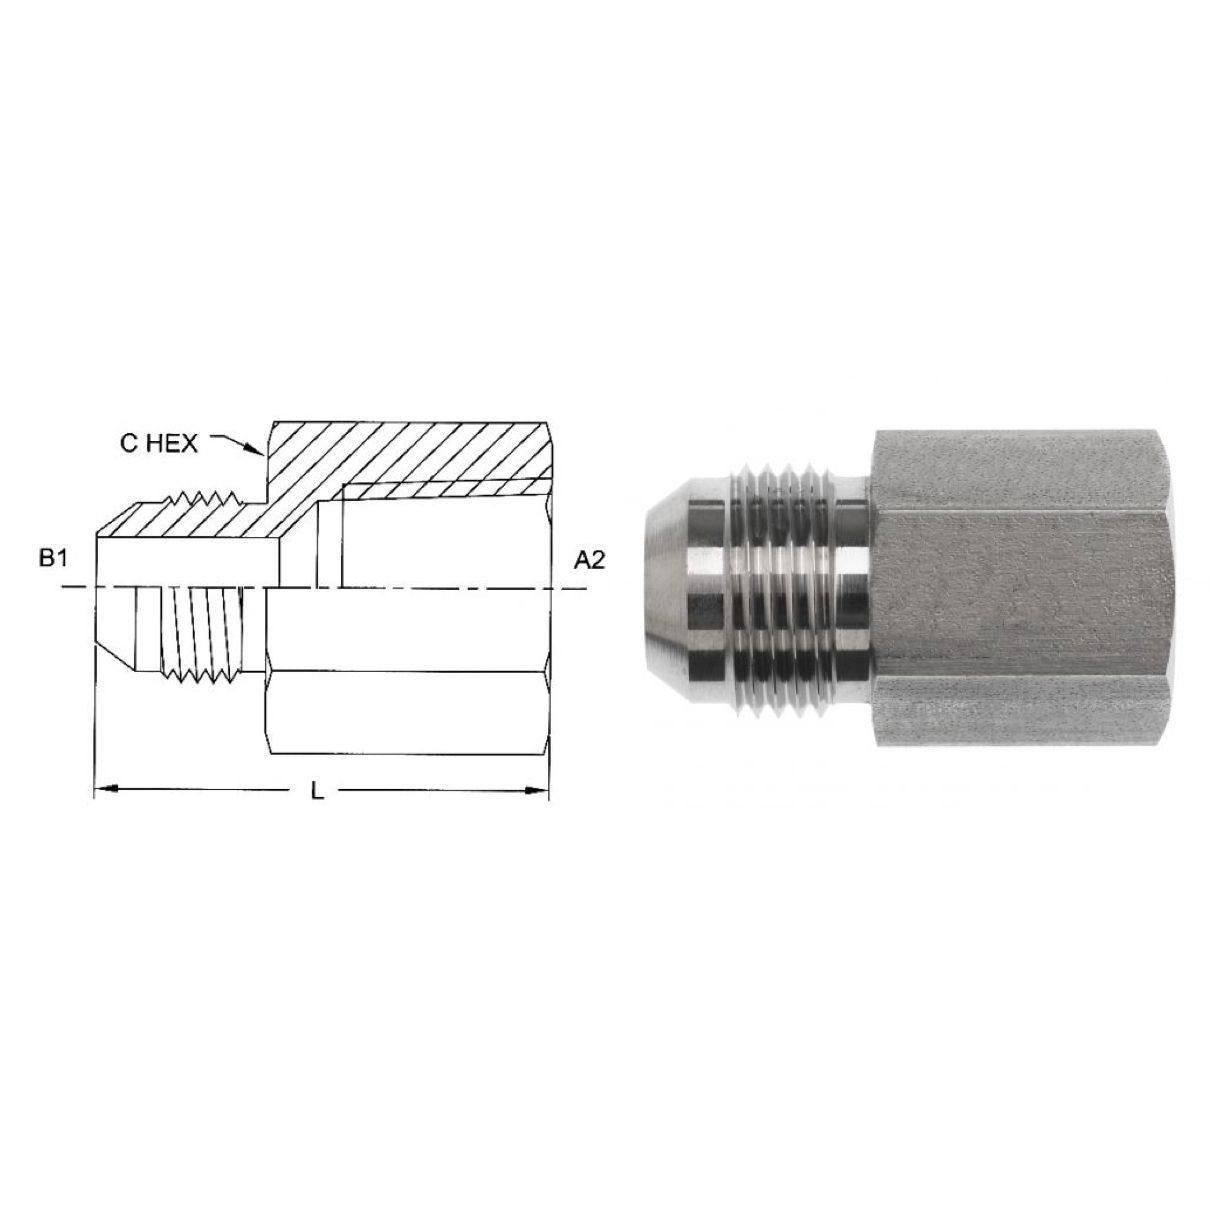 2405-08-12 : OneHydraulics Adapter, Straight, 0.5 (1/2") Male NPT x 0.75 (3/4") Female, Steel, 4000psi